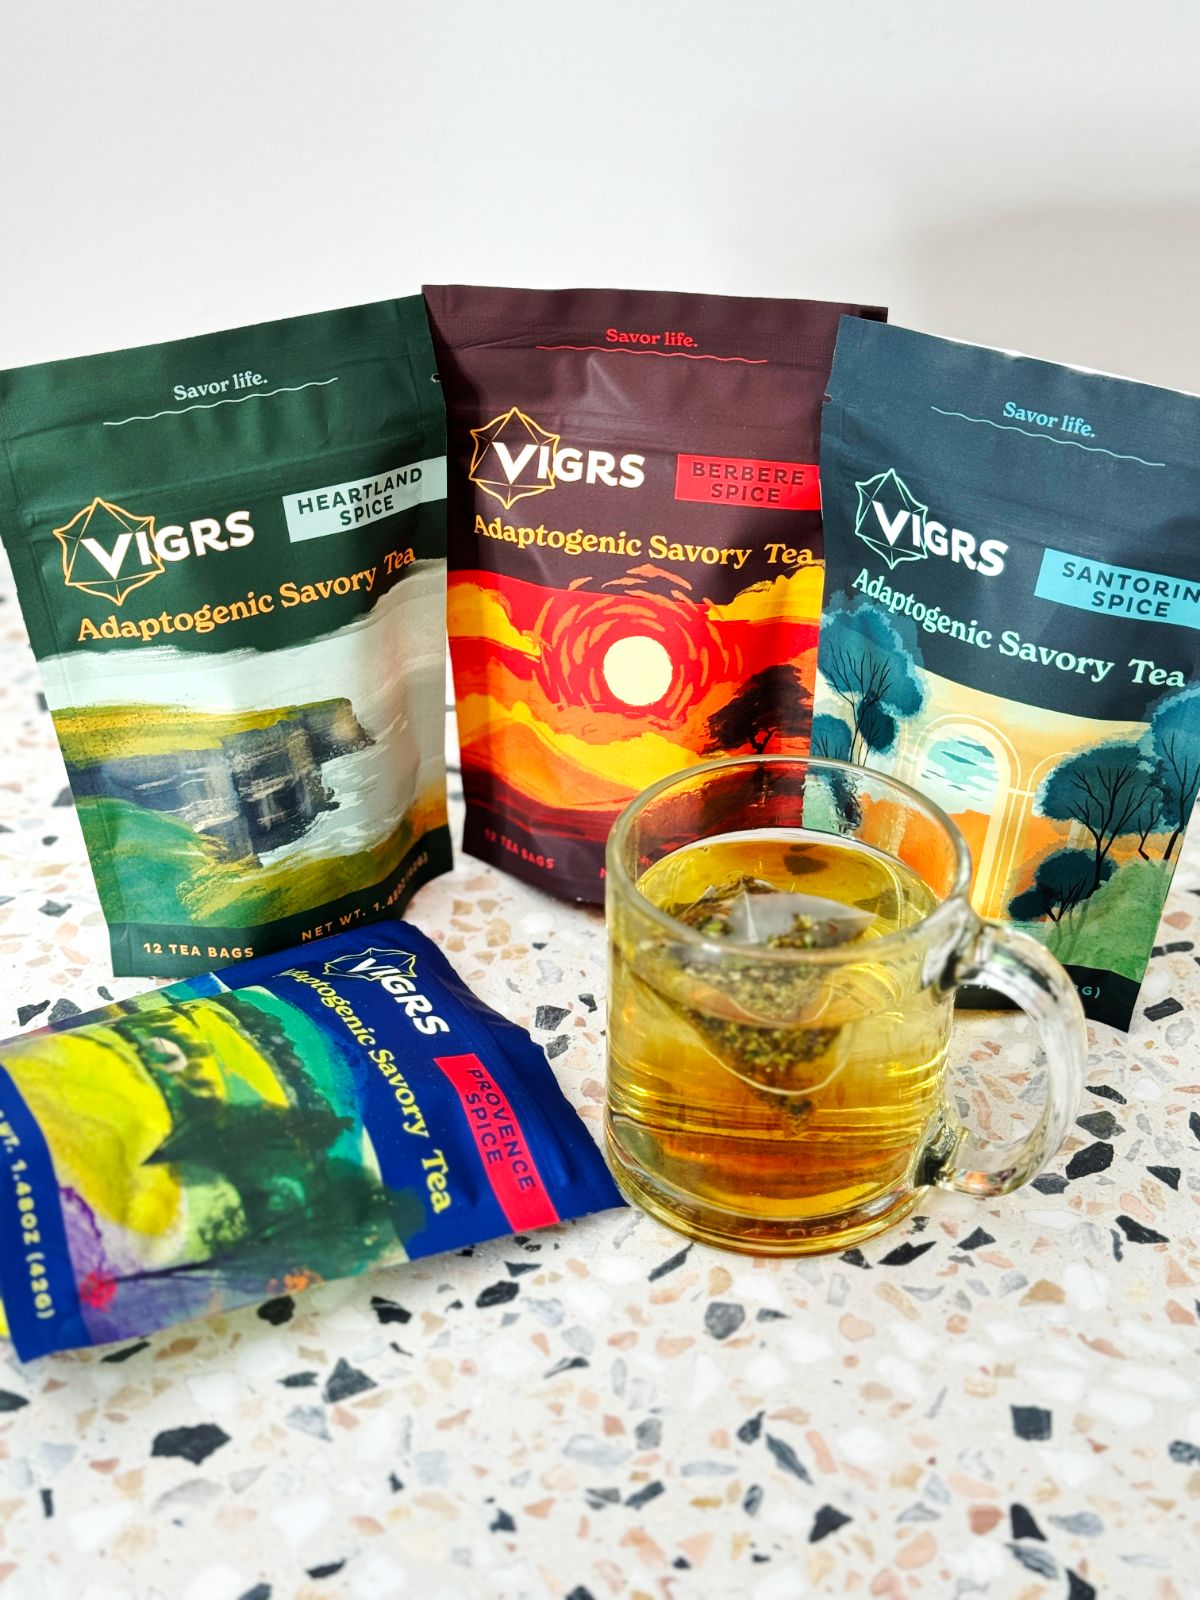 Four bags of Vigrs savory tea and a tea bag steeping in a clear mug. 